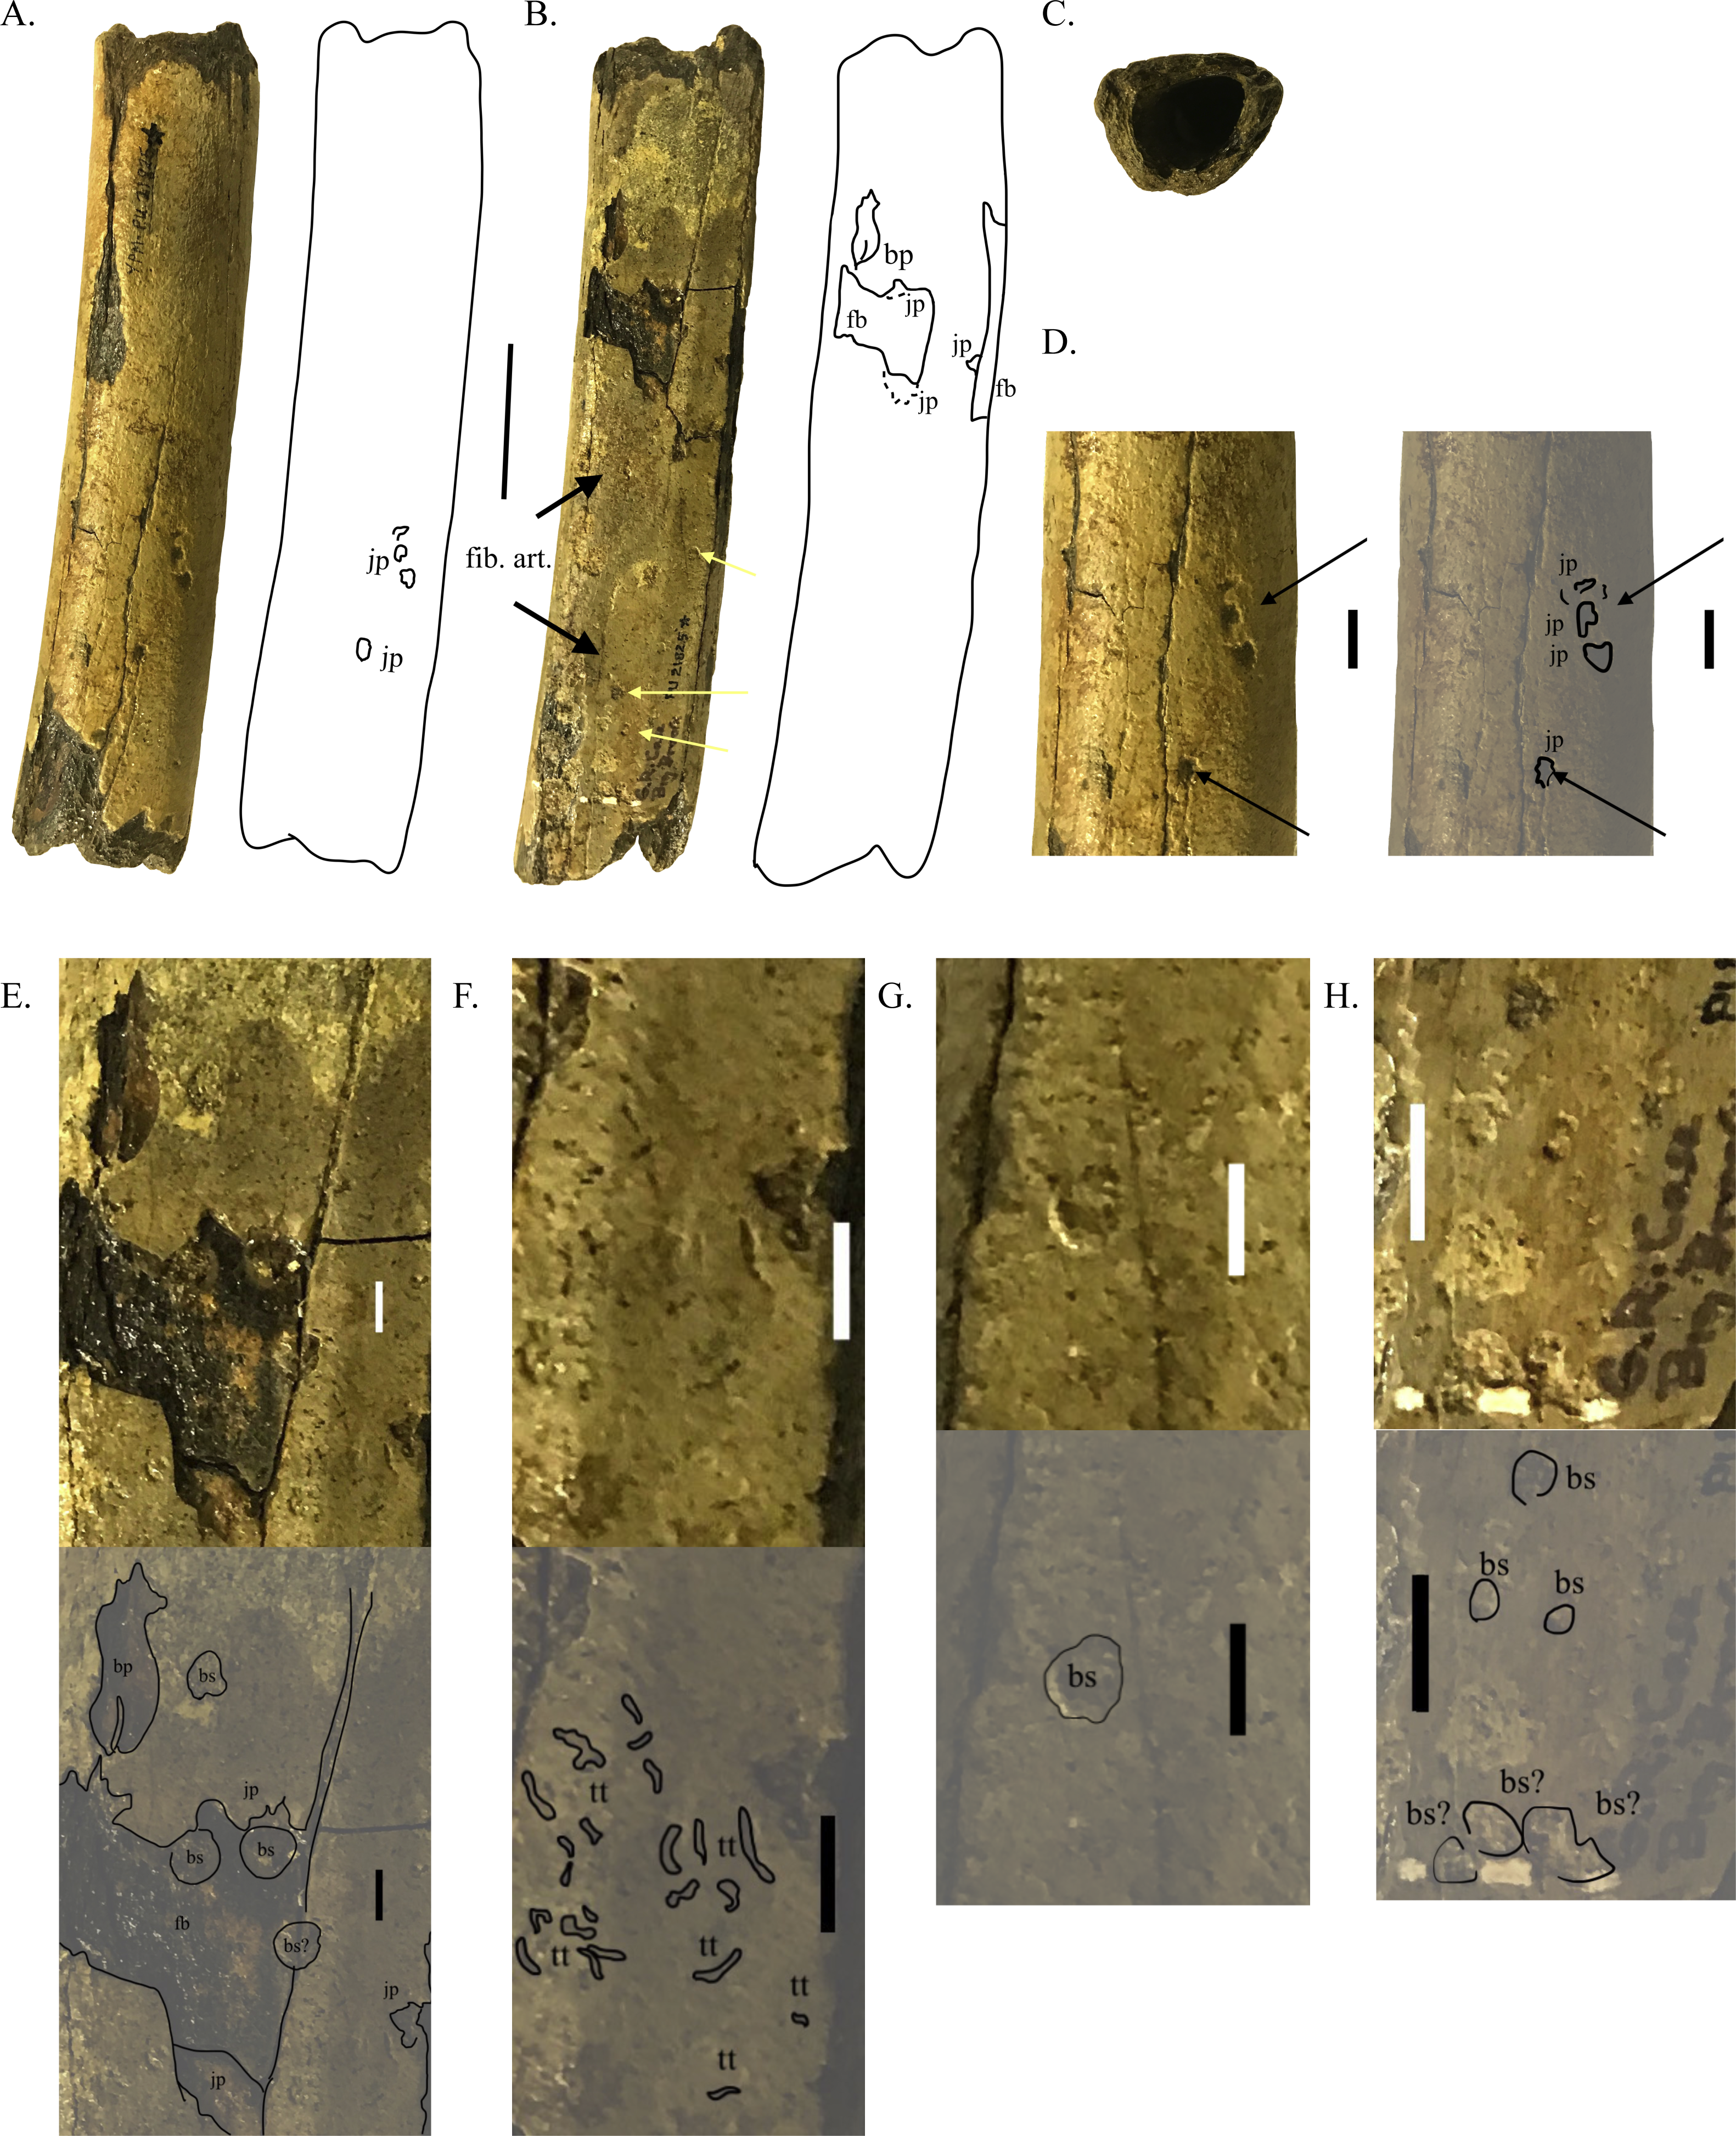 Trace fossils on dinosaur bones reveal ecosystem dynamics along the coast  of eastern North America during the latest Cretaceous [PeerJ]